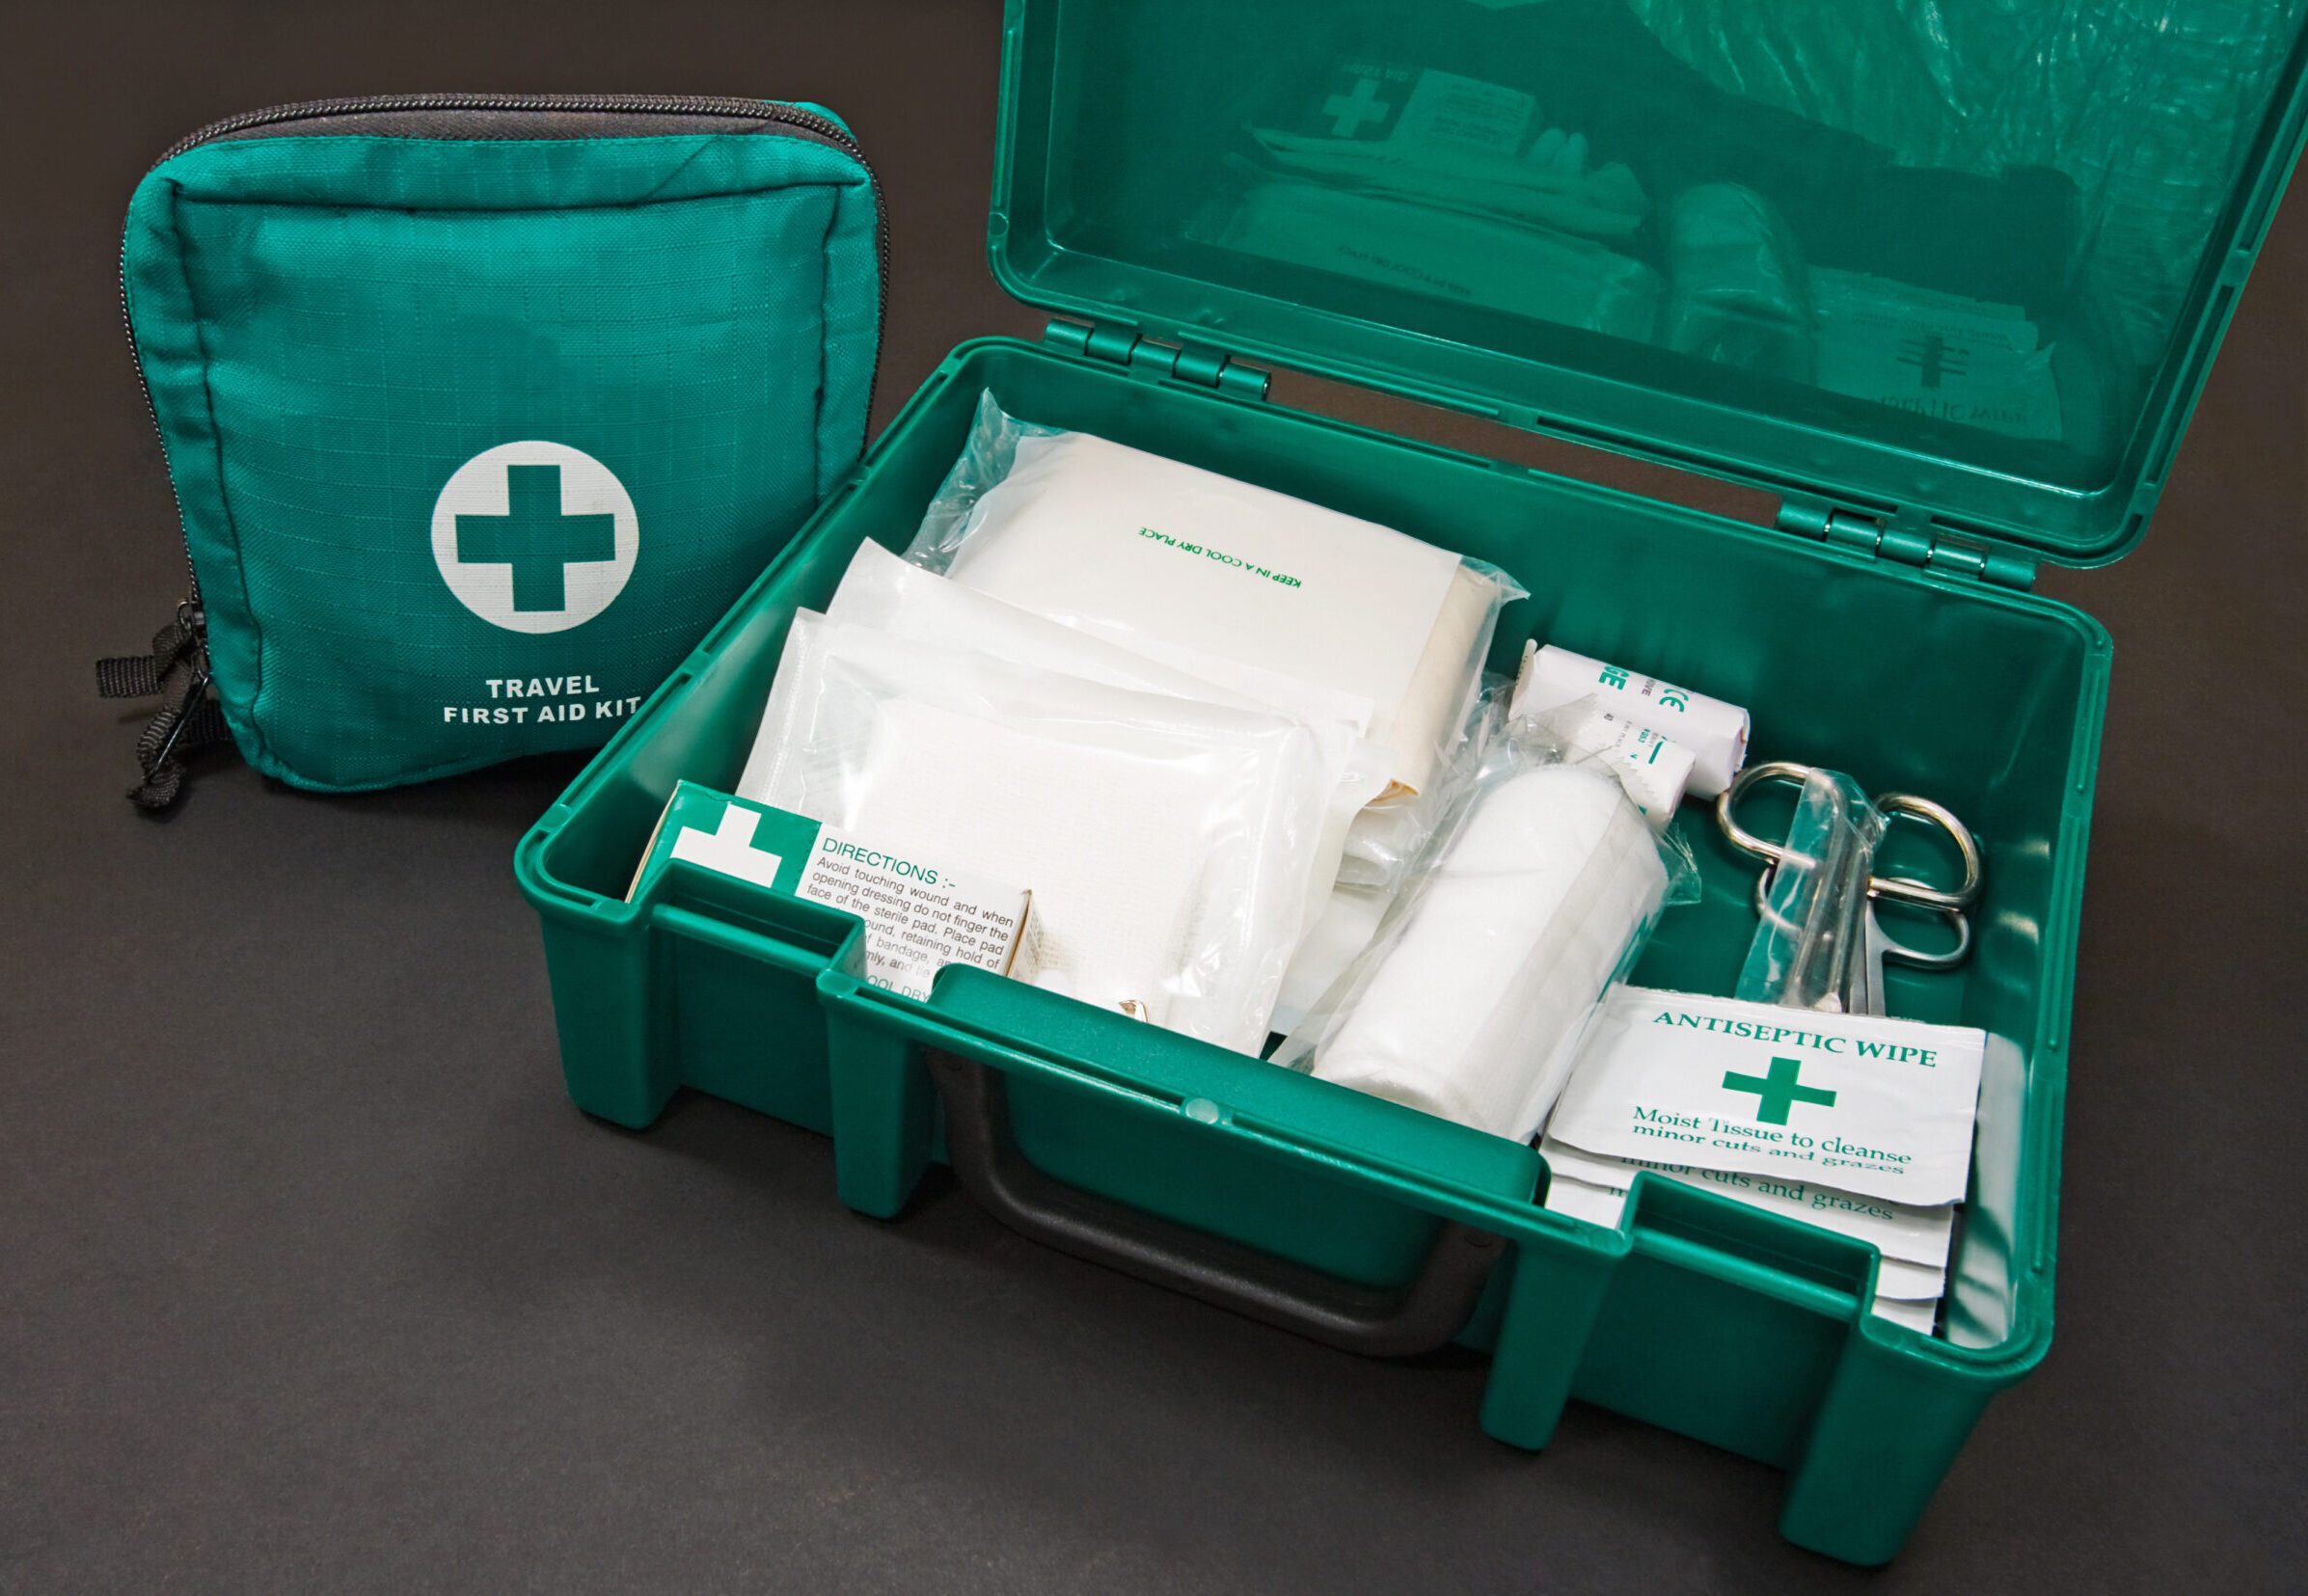 A green standard First aid kit, used to provide urgent emergency treatment at school, work or in the home.